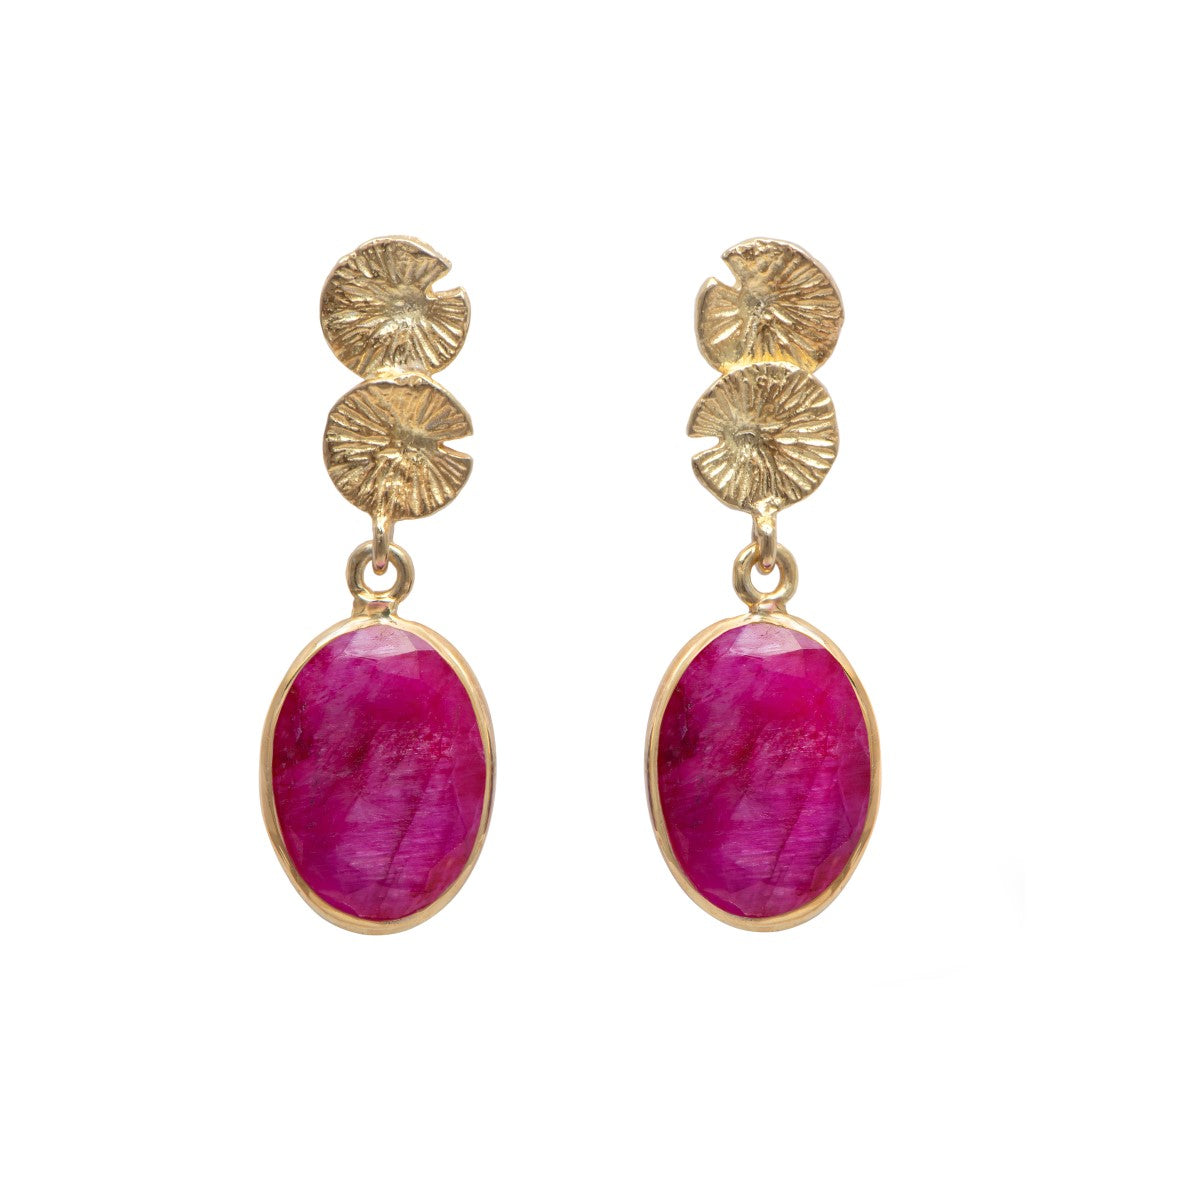 Lily Pad Earrings in Gold Plated Sterling Silver with a Ruby Quartz Gemstone Drop